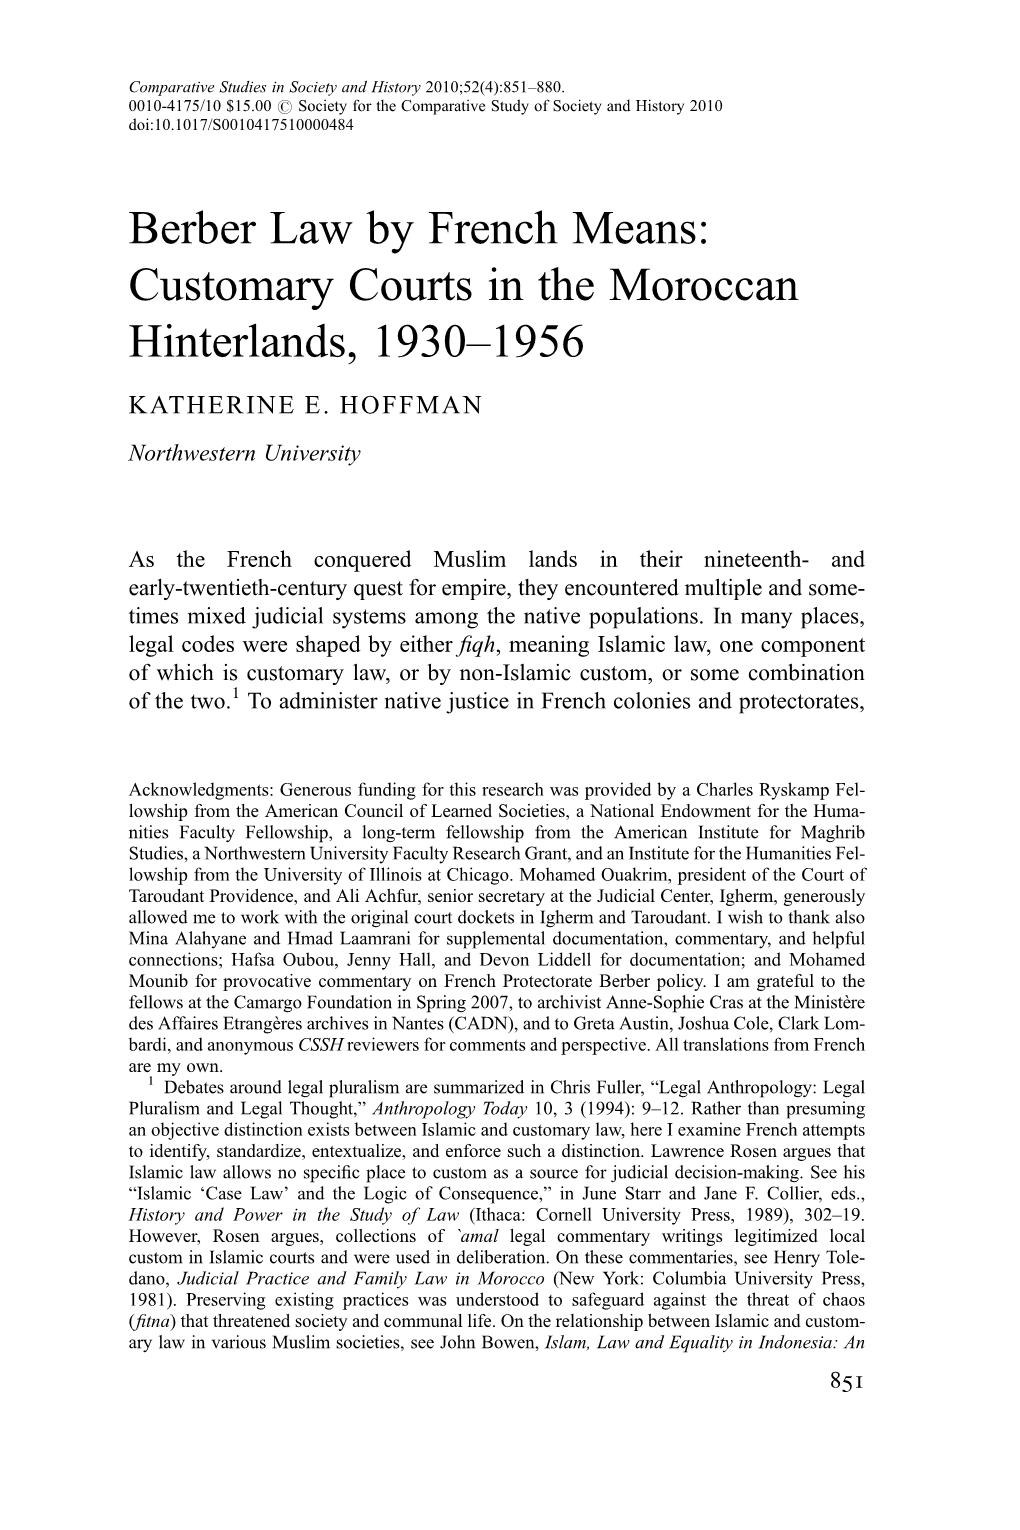 Berber Law by French Means: Customary Courts in the Moroccan Hinterlands, 1930–1956